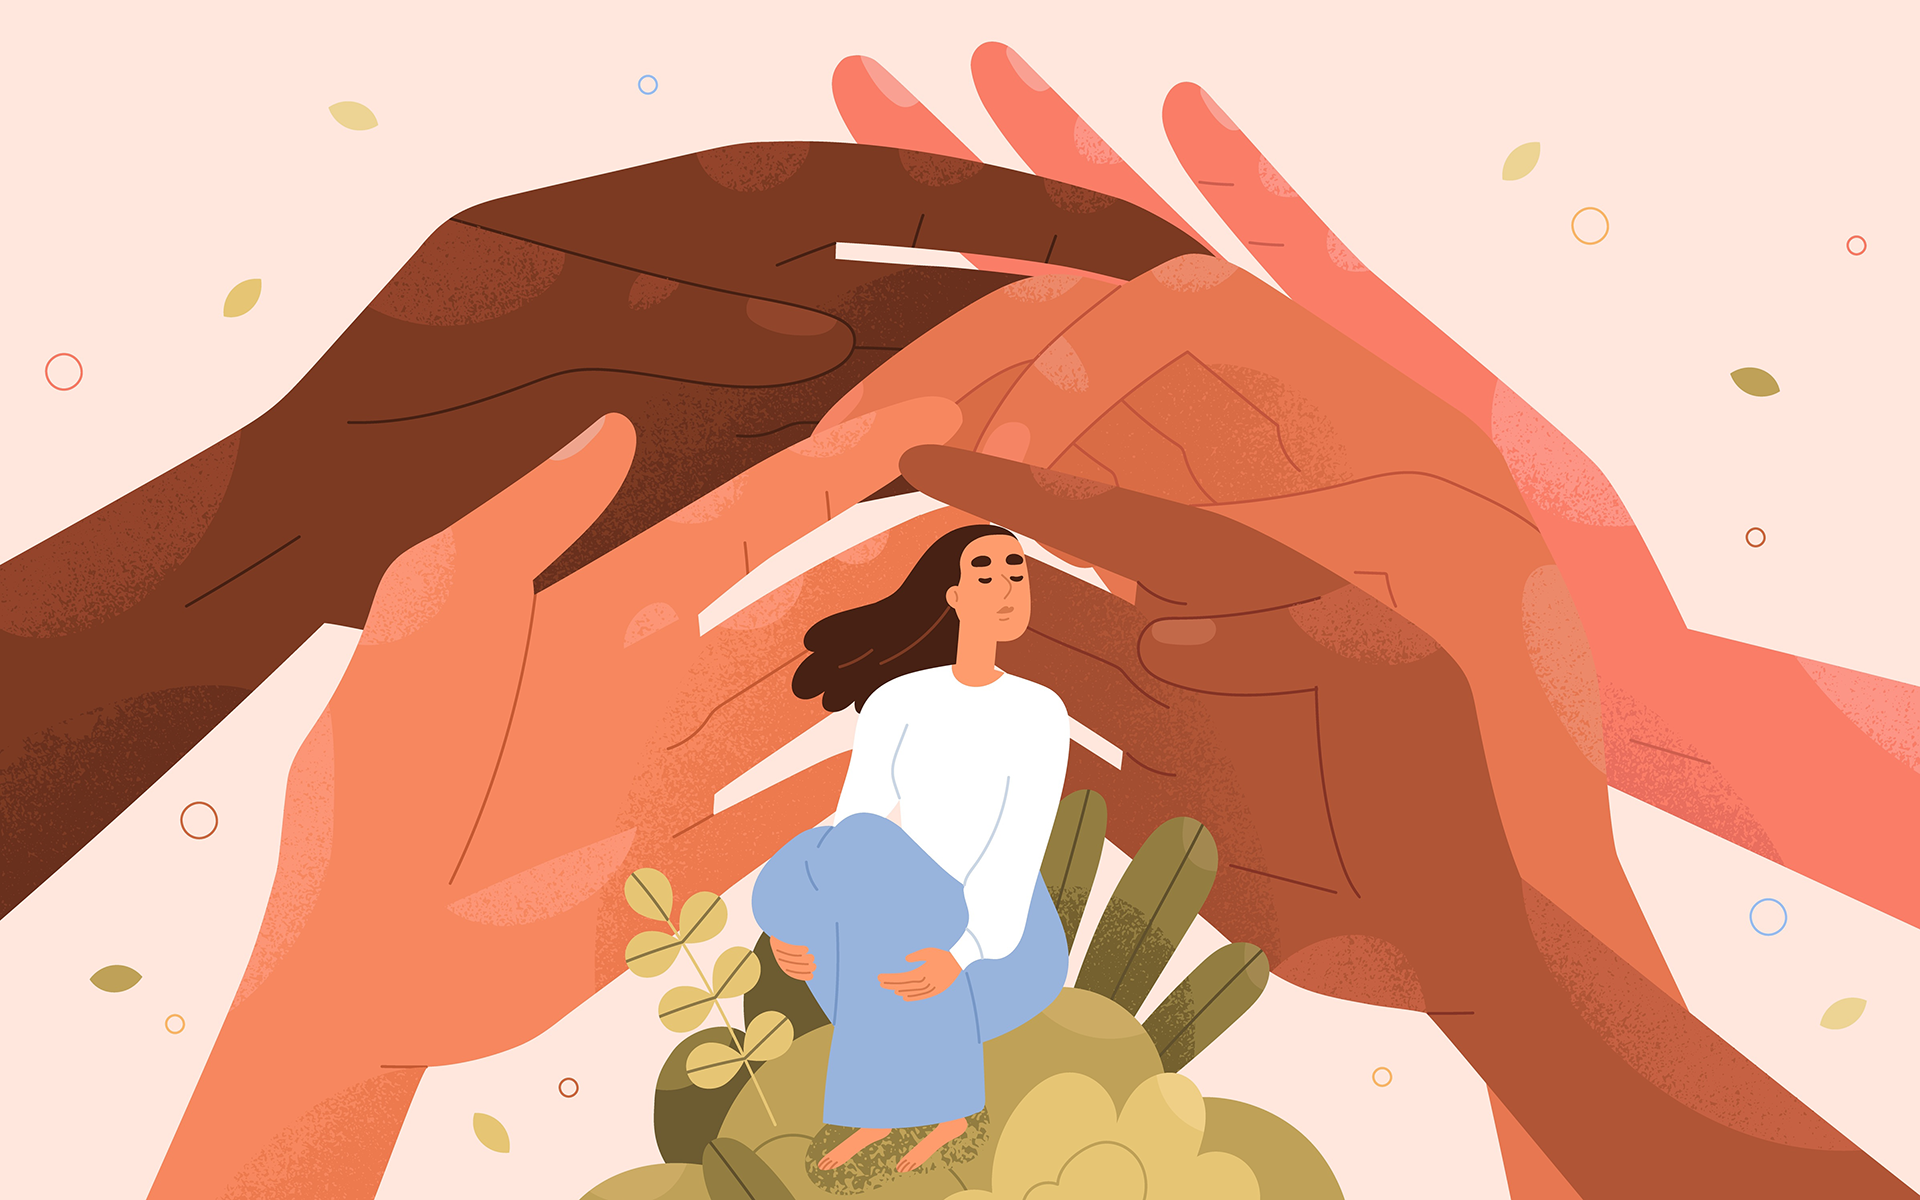 Illustration of five large hands reaching around a woman sitting on a patch of grass in a supportive gesture.